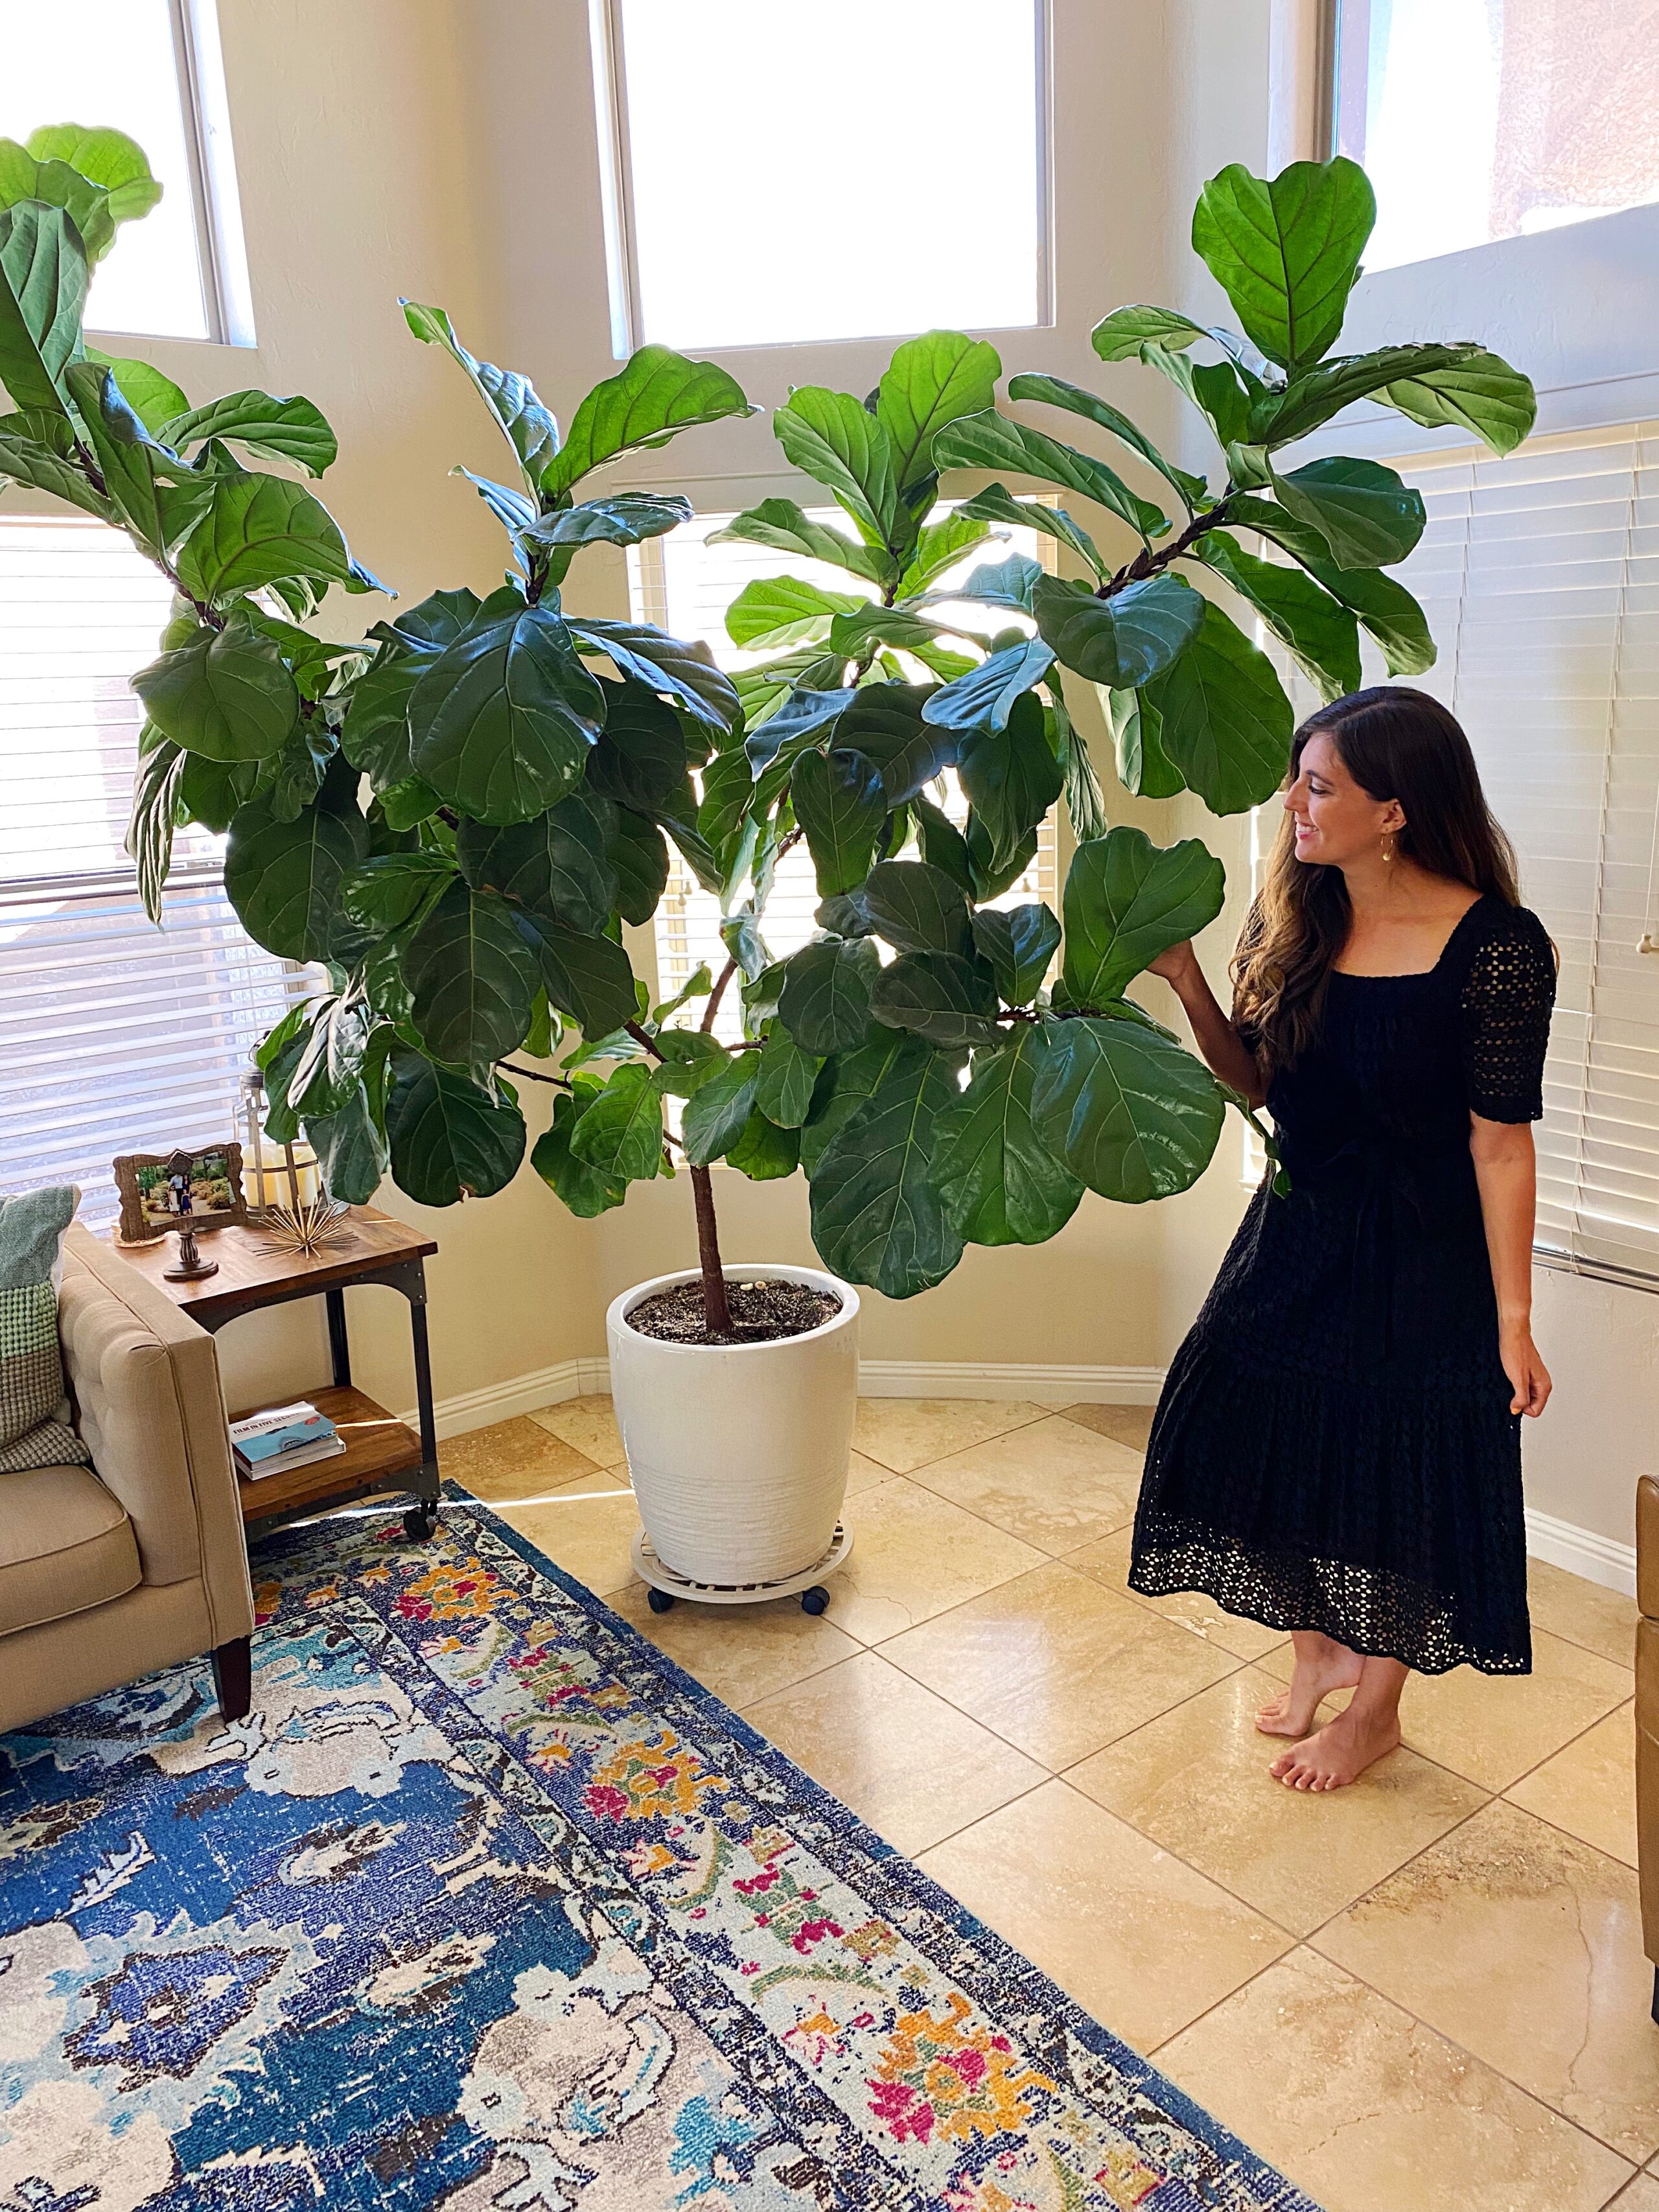 How to care for a fiddle leaf fig tree